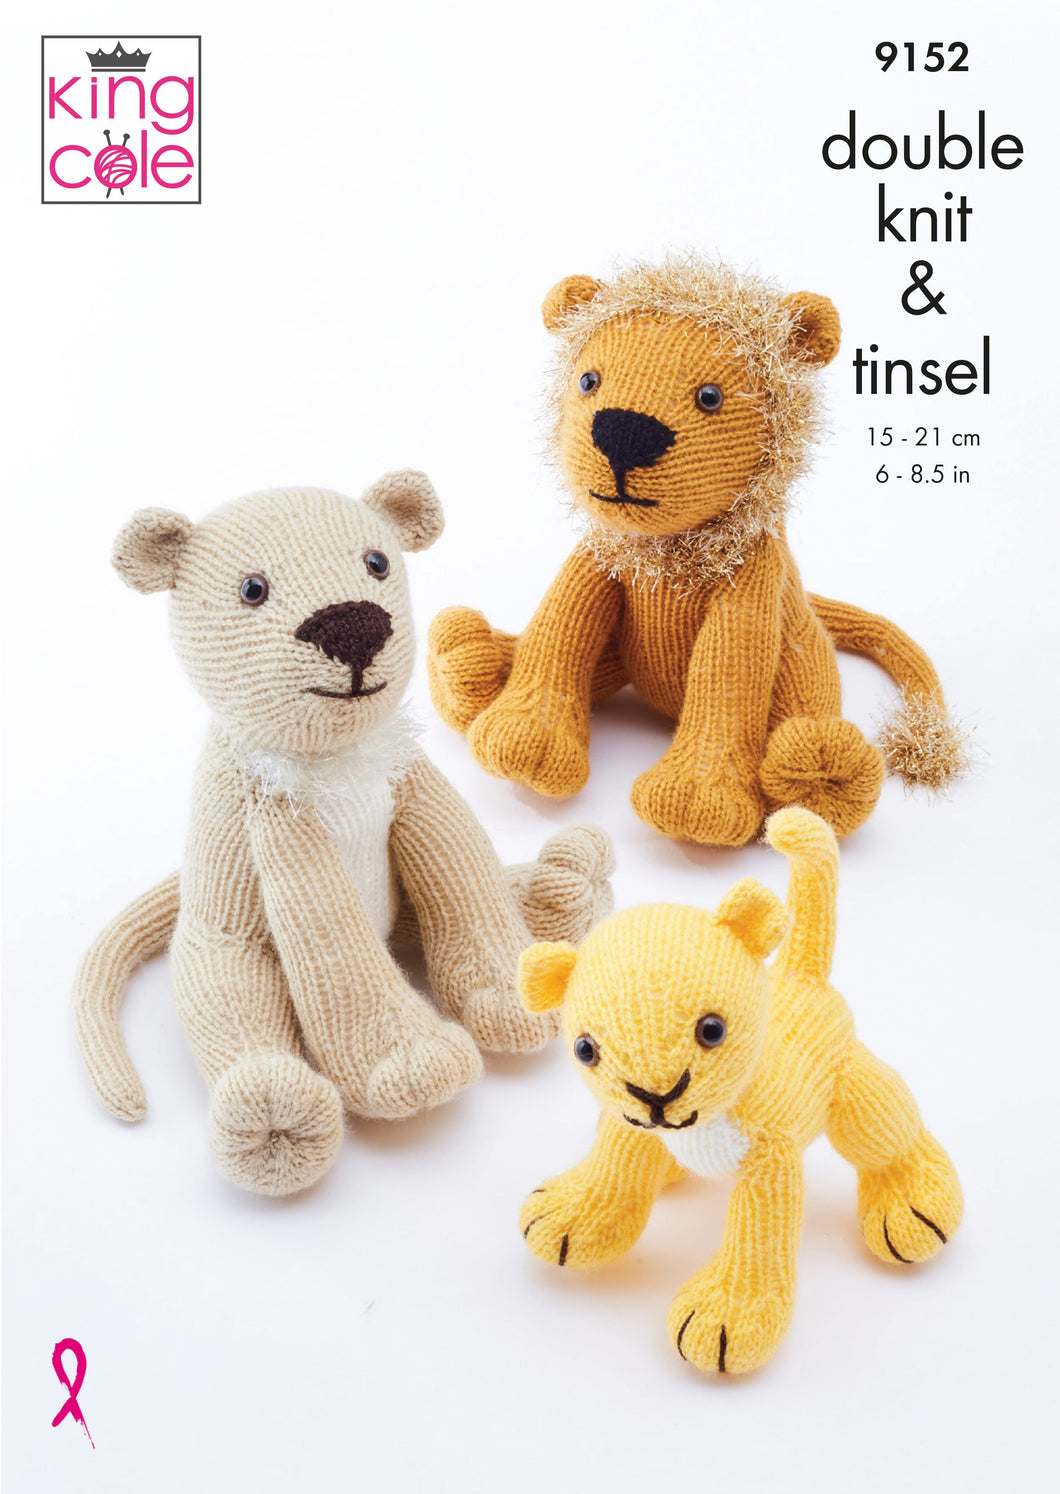 King Cole / TINSEL CHUNKY KNITTING PATTERN - 9152 Lions